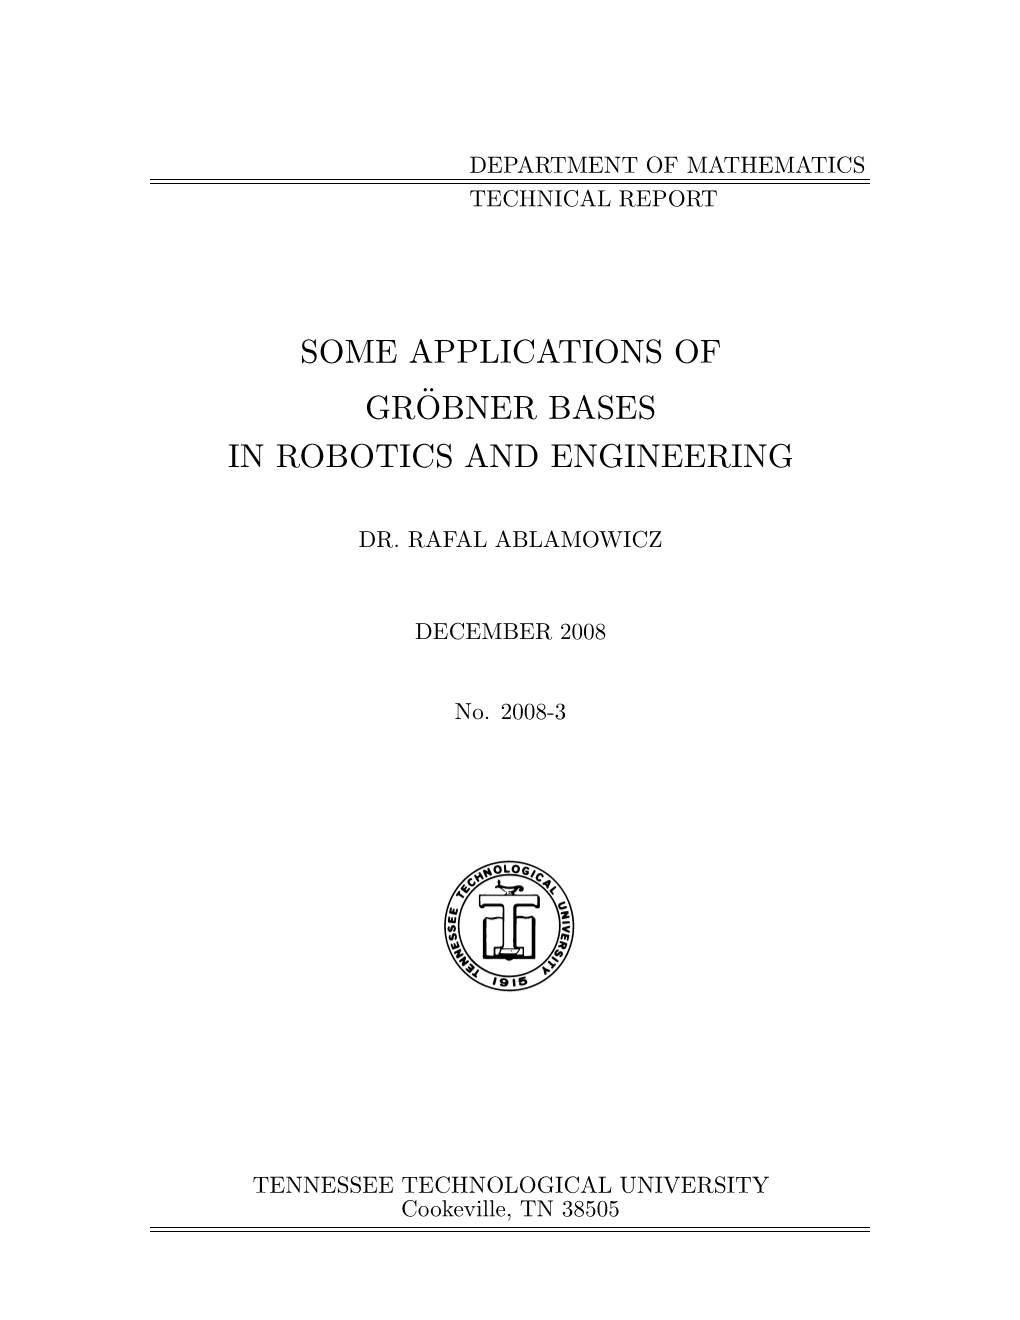 Some Applications of Gr¨Obner Bases in Robotics and Engineering 3